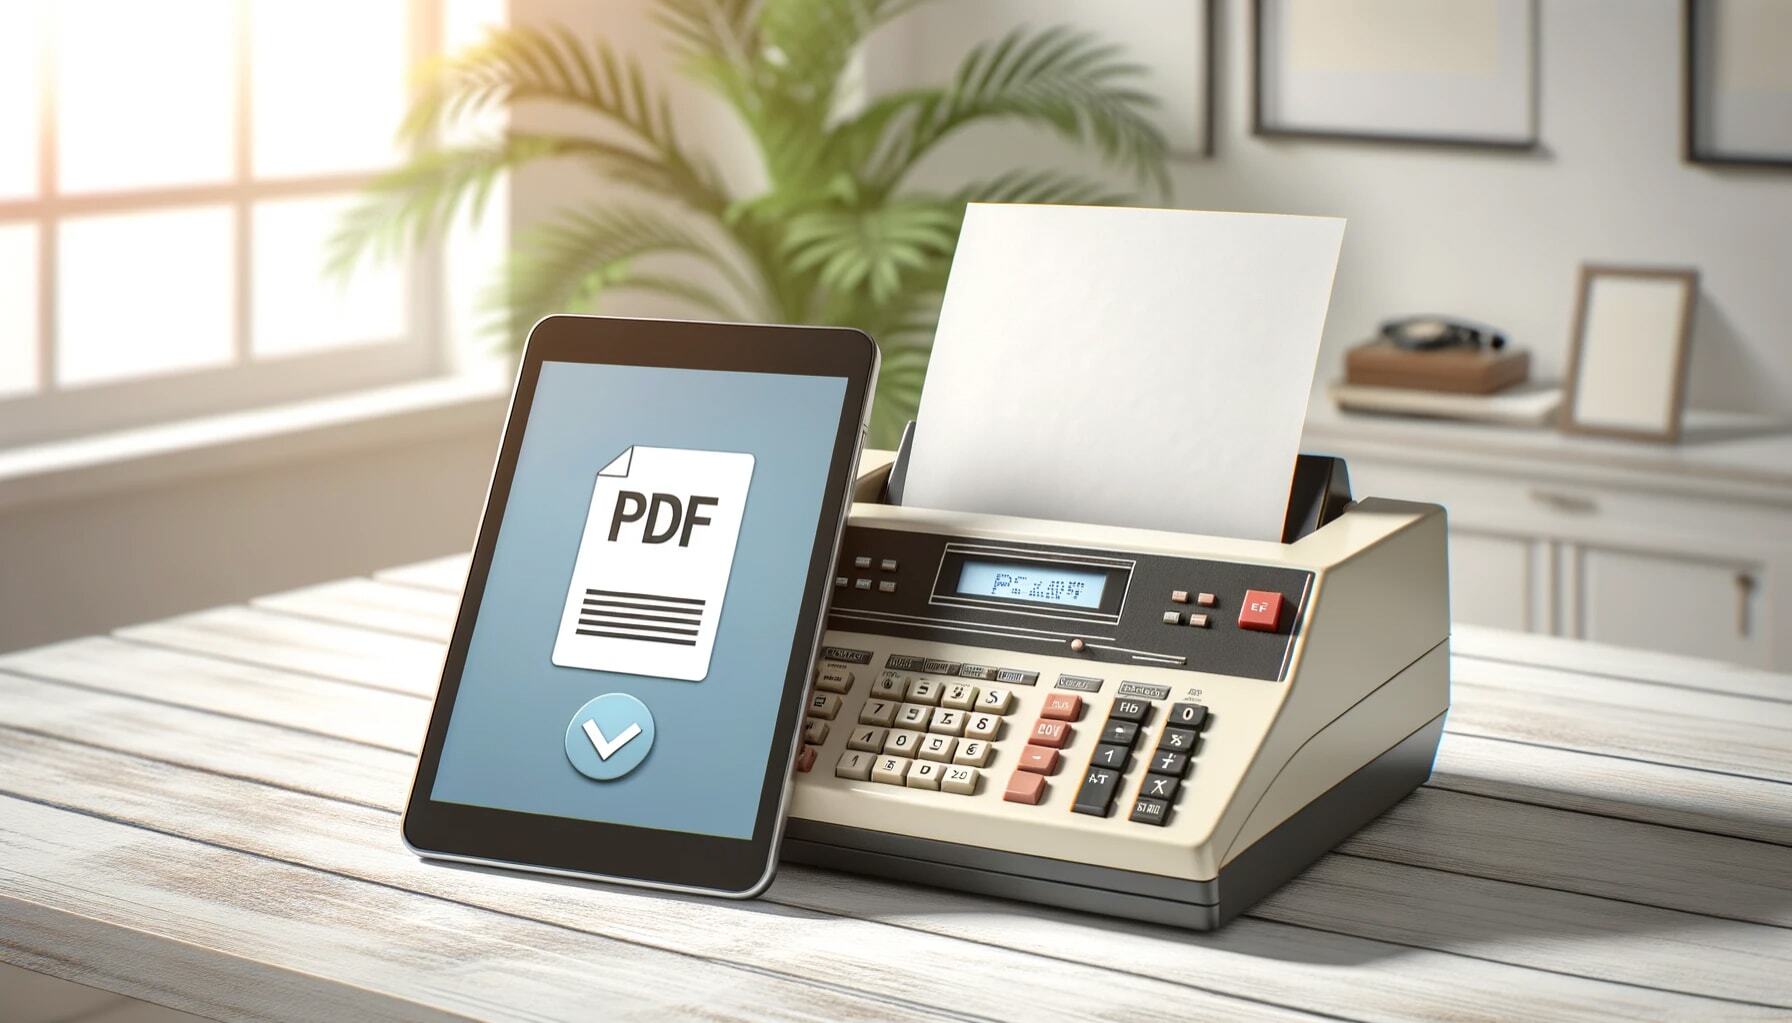 How to send PDF as a Fax Online step-by-step guide.